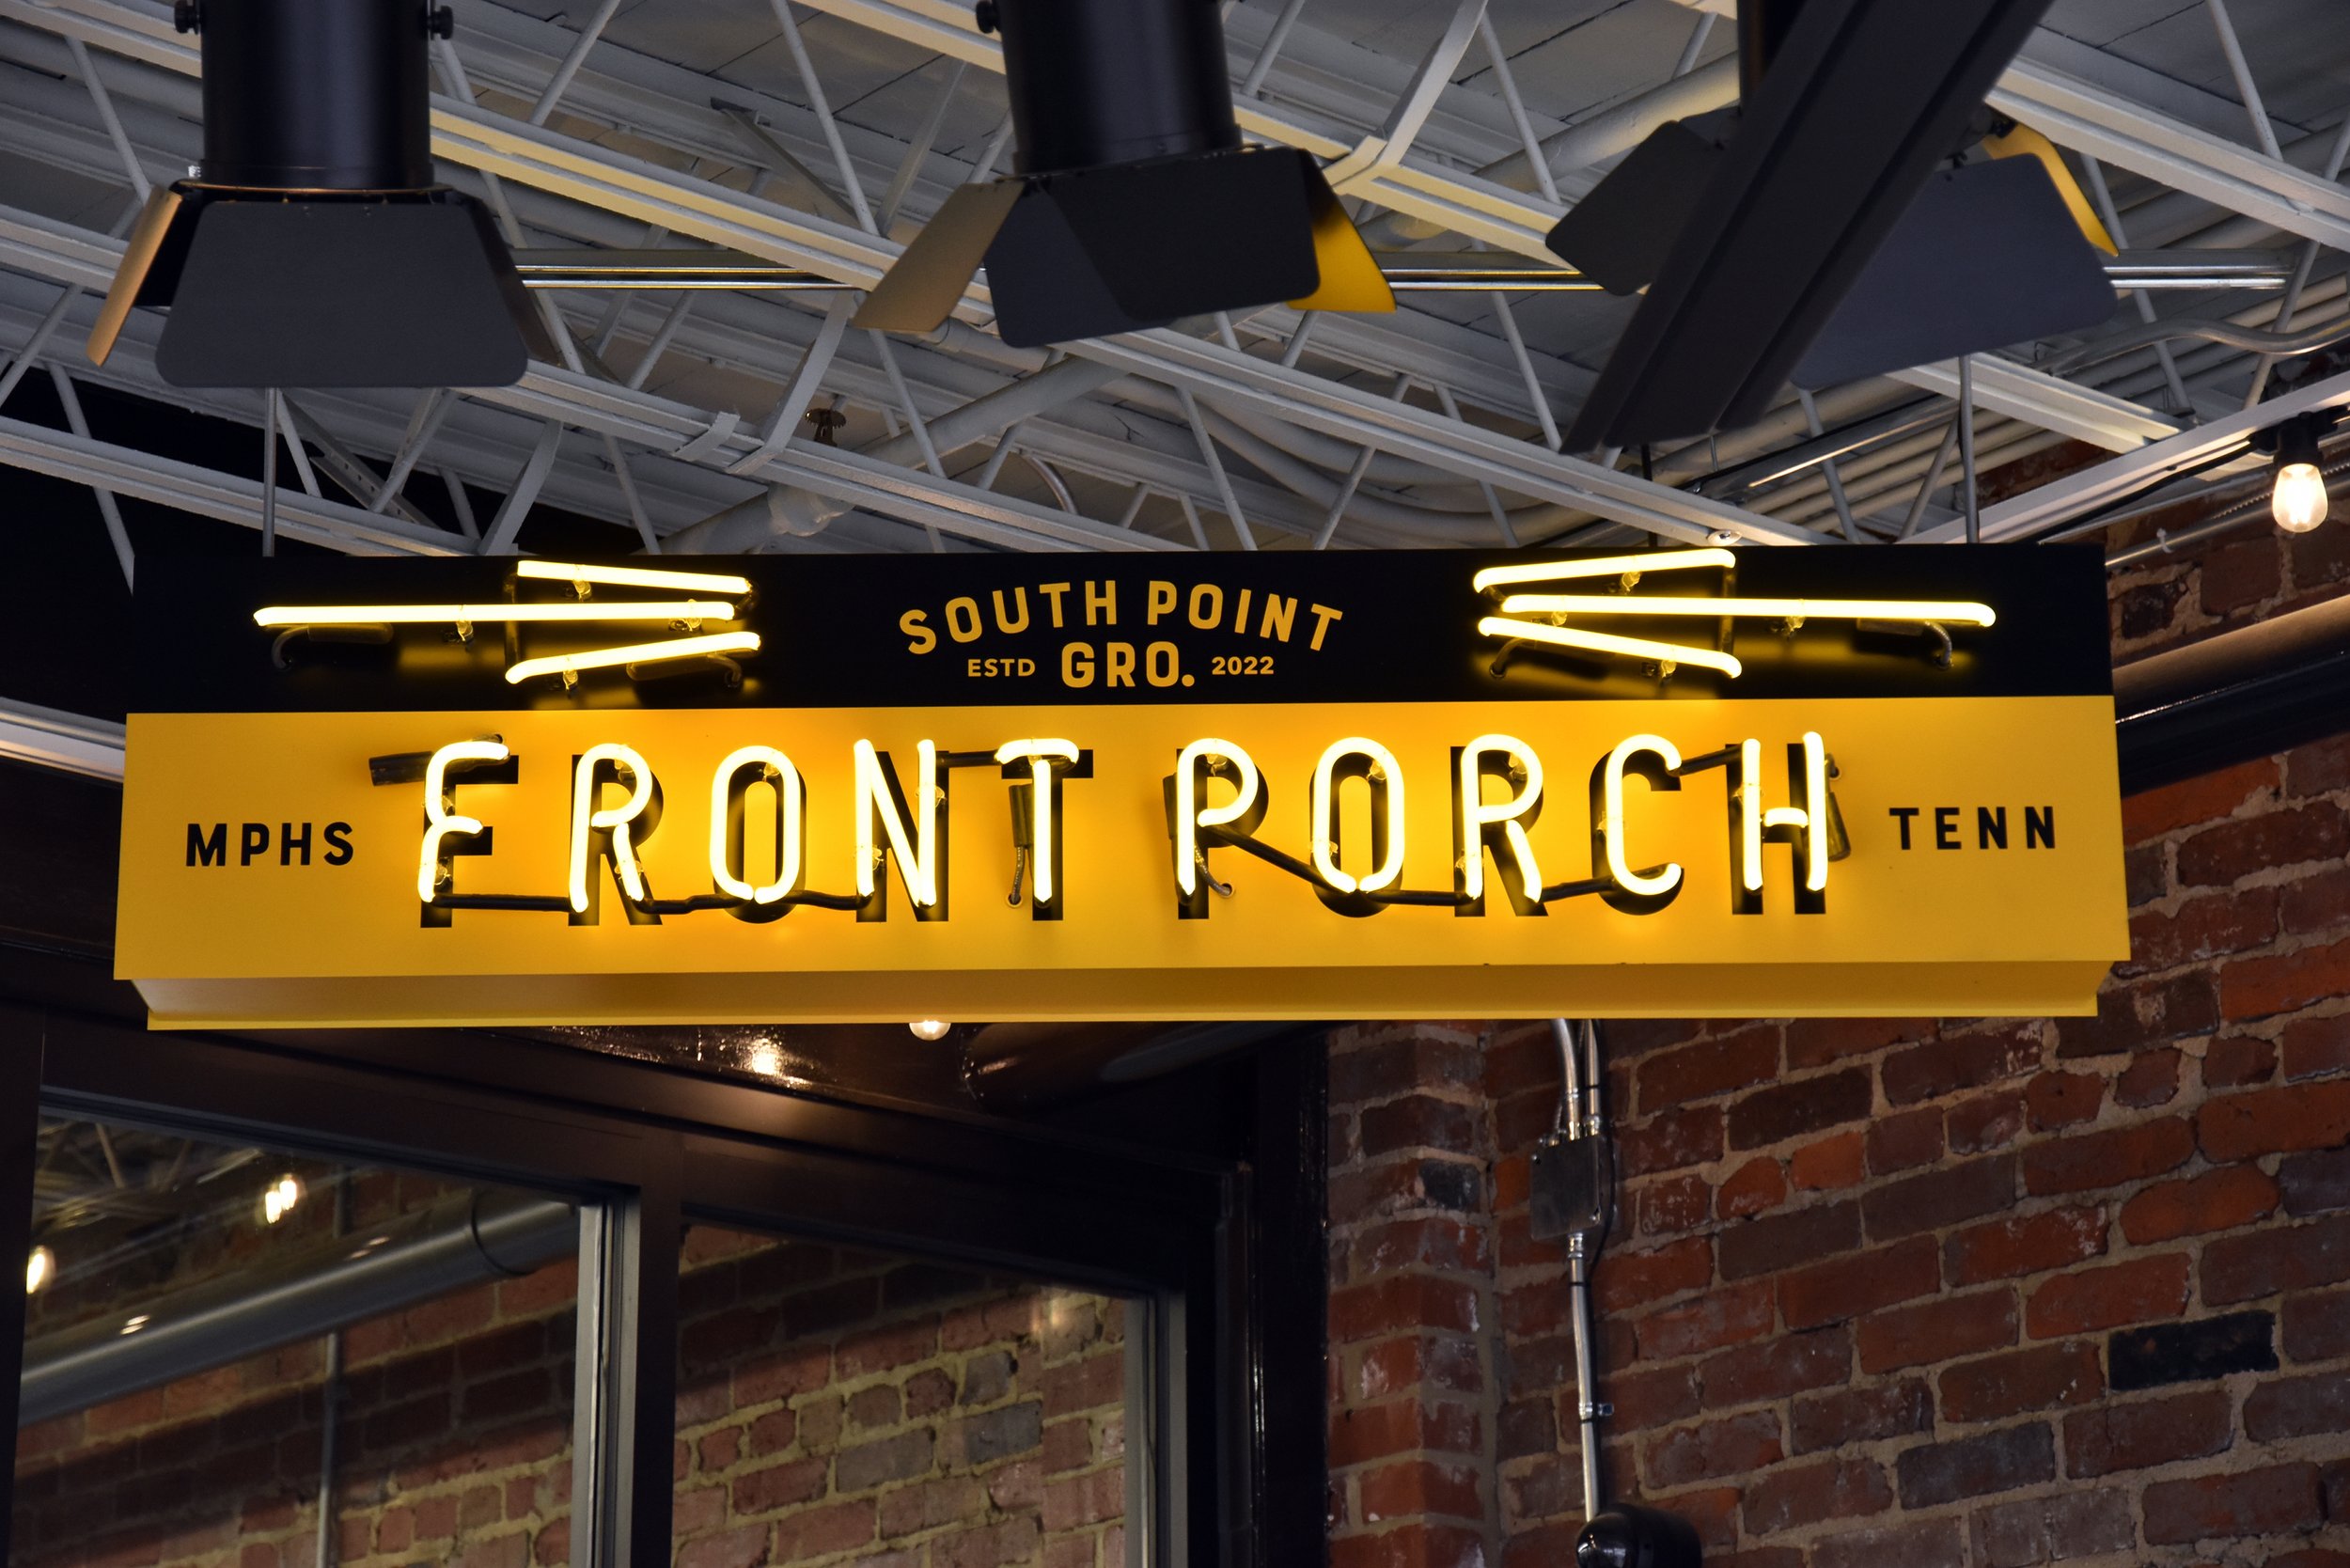  South Point Grocery  Downtown Memphis  “Front Porch” neon sign  Branding creative and design by Chuck Mitchell  Sign fabrication and installation by Frank Balton Sign Company 